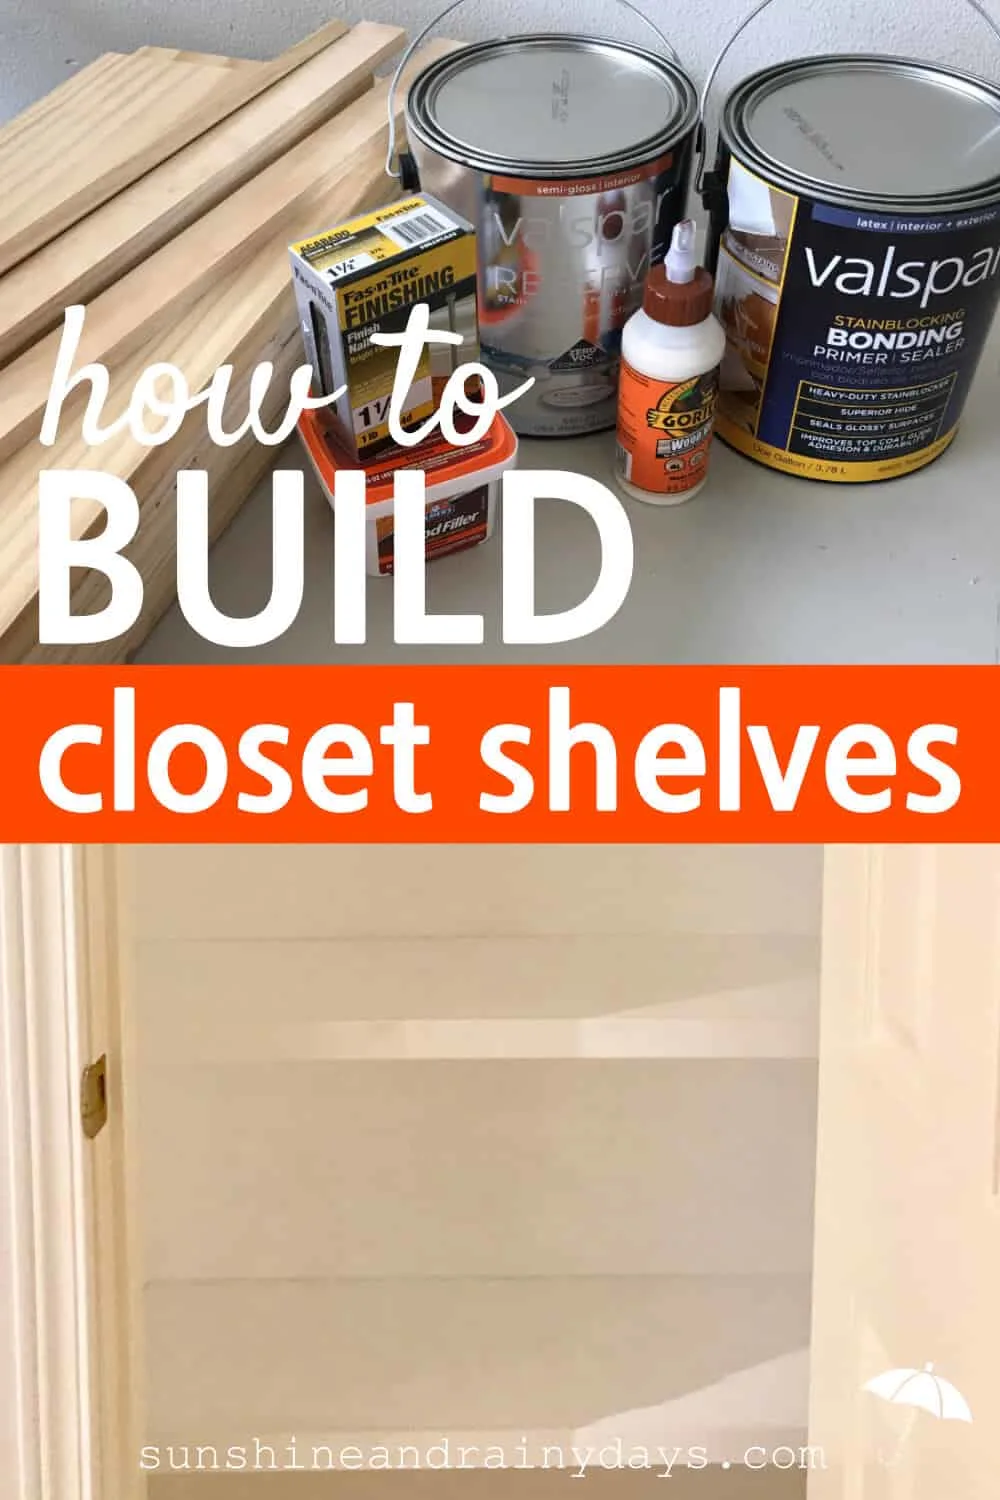 We recently visited The Street Of Dreams and I noticed the homes had custom made closets. I had to learn How To Build Closet Shelves!